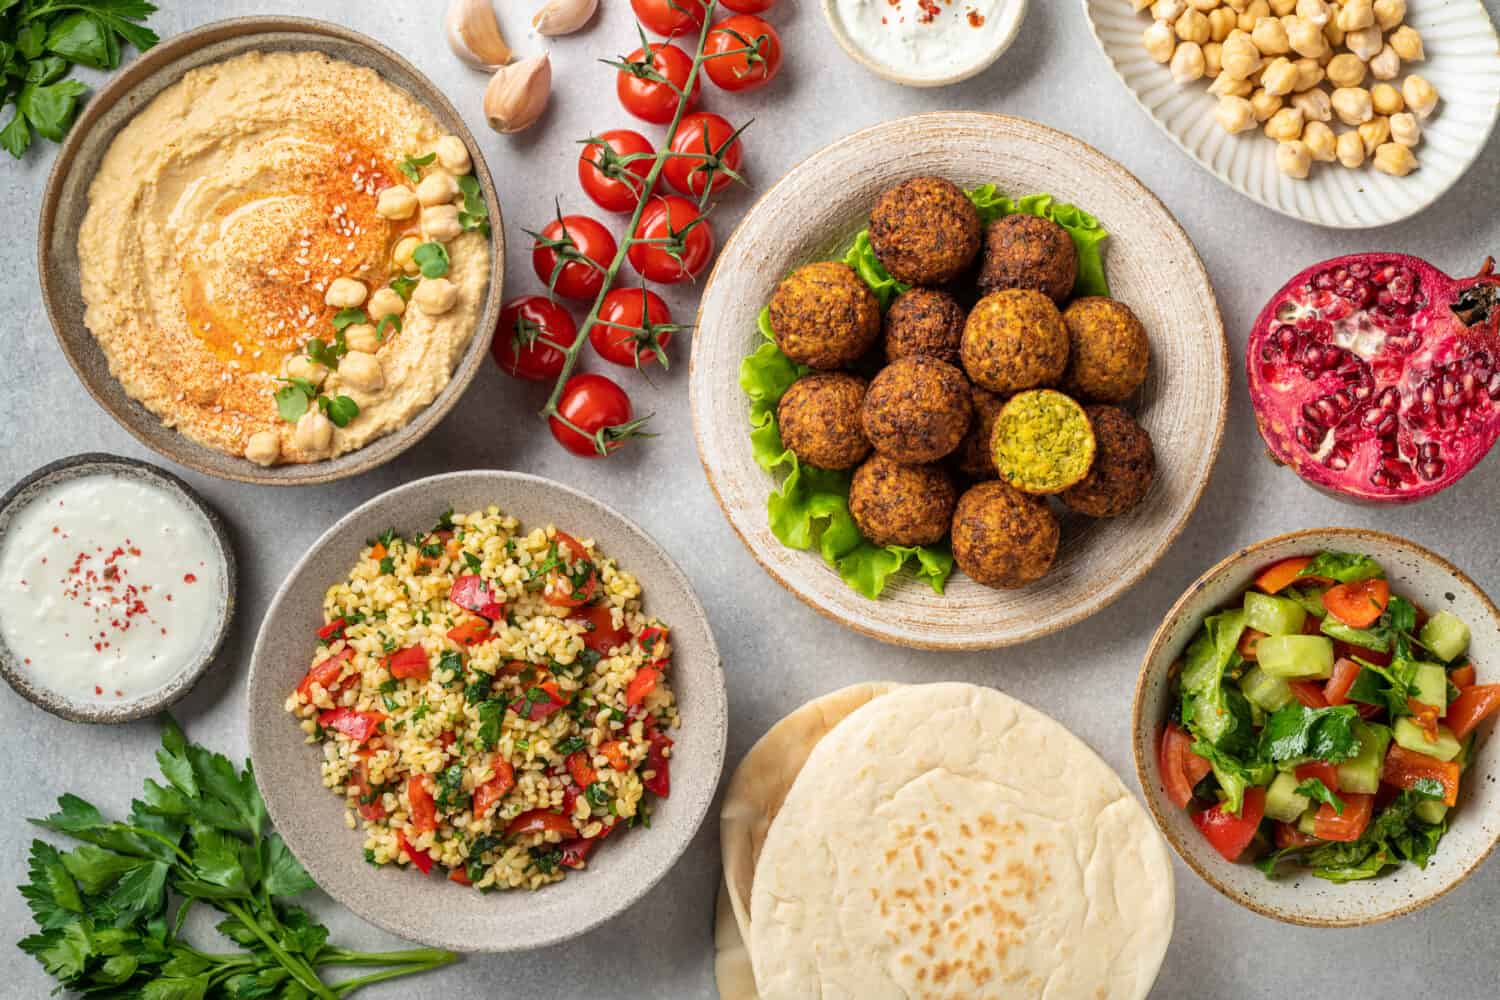 Middle eastern or arabic cuisines, falafel, hummus, tabouleh, pita and vegetables on a concrete background, view from above